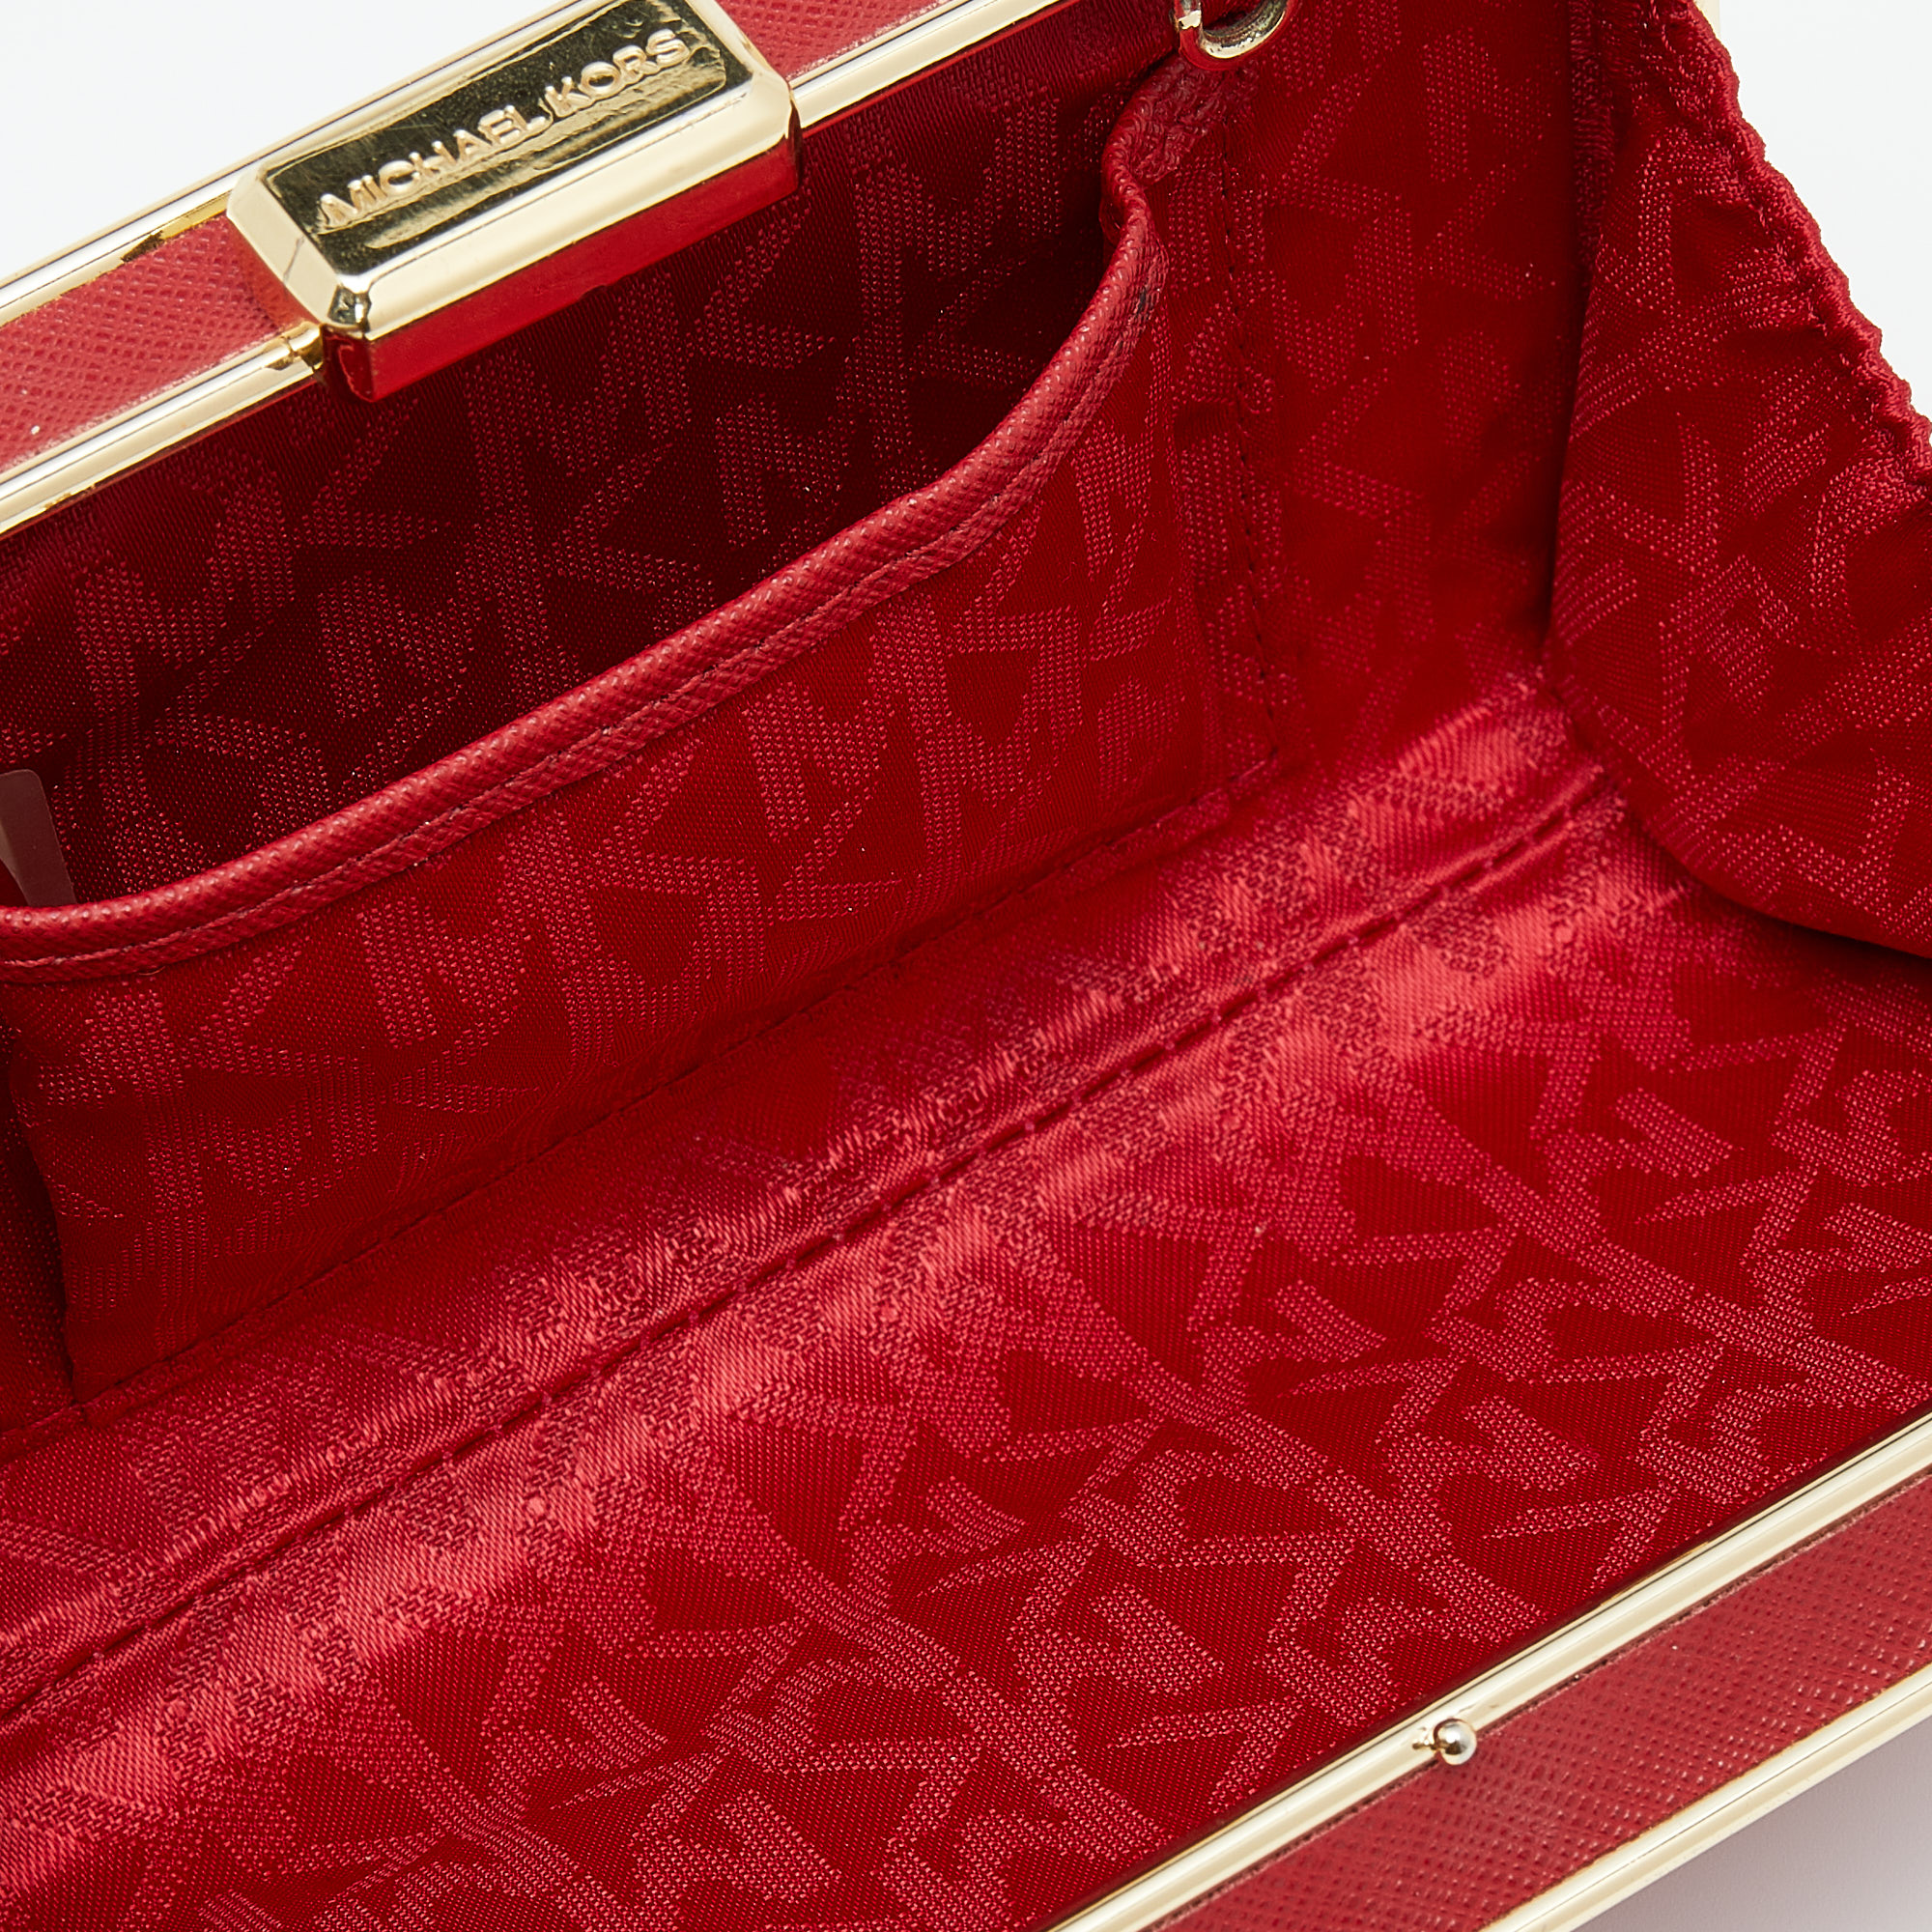 Michael Kors Red Saffiano Leather Minaudiere Clutch